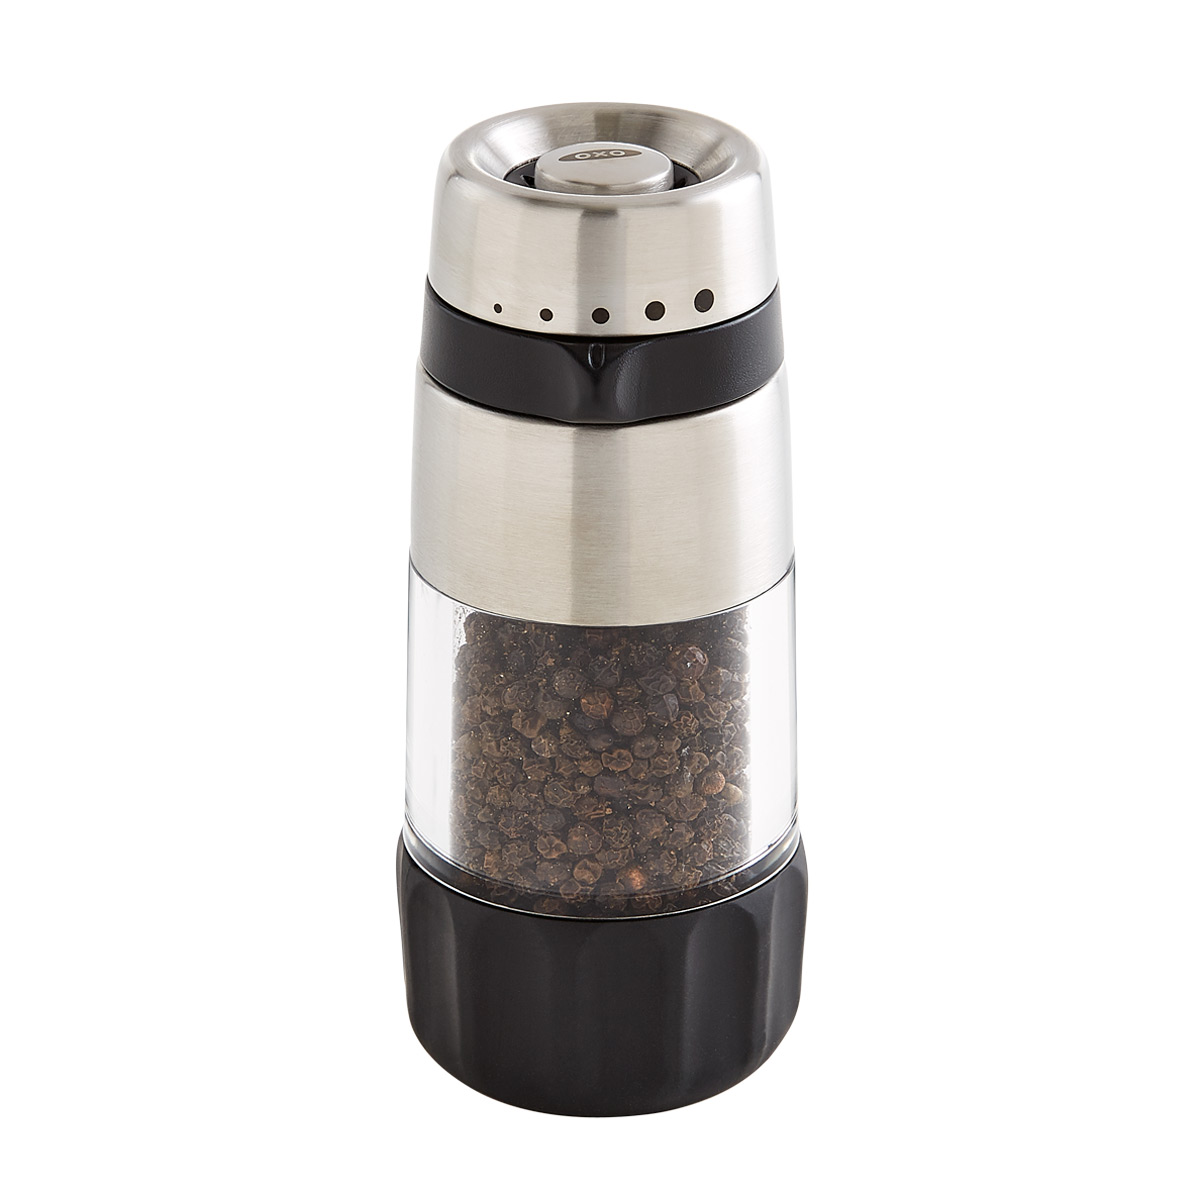 https://www.containerstore.com/catalogimages/332743/10073616-OXO-Pepper-Grinder.jpg